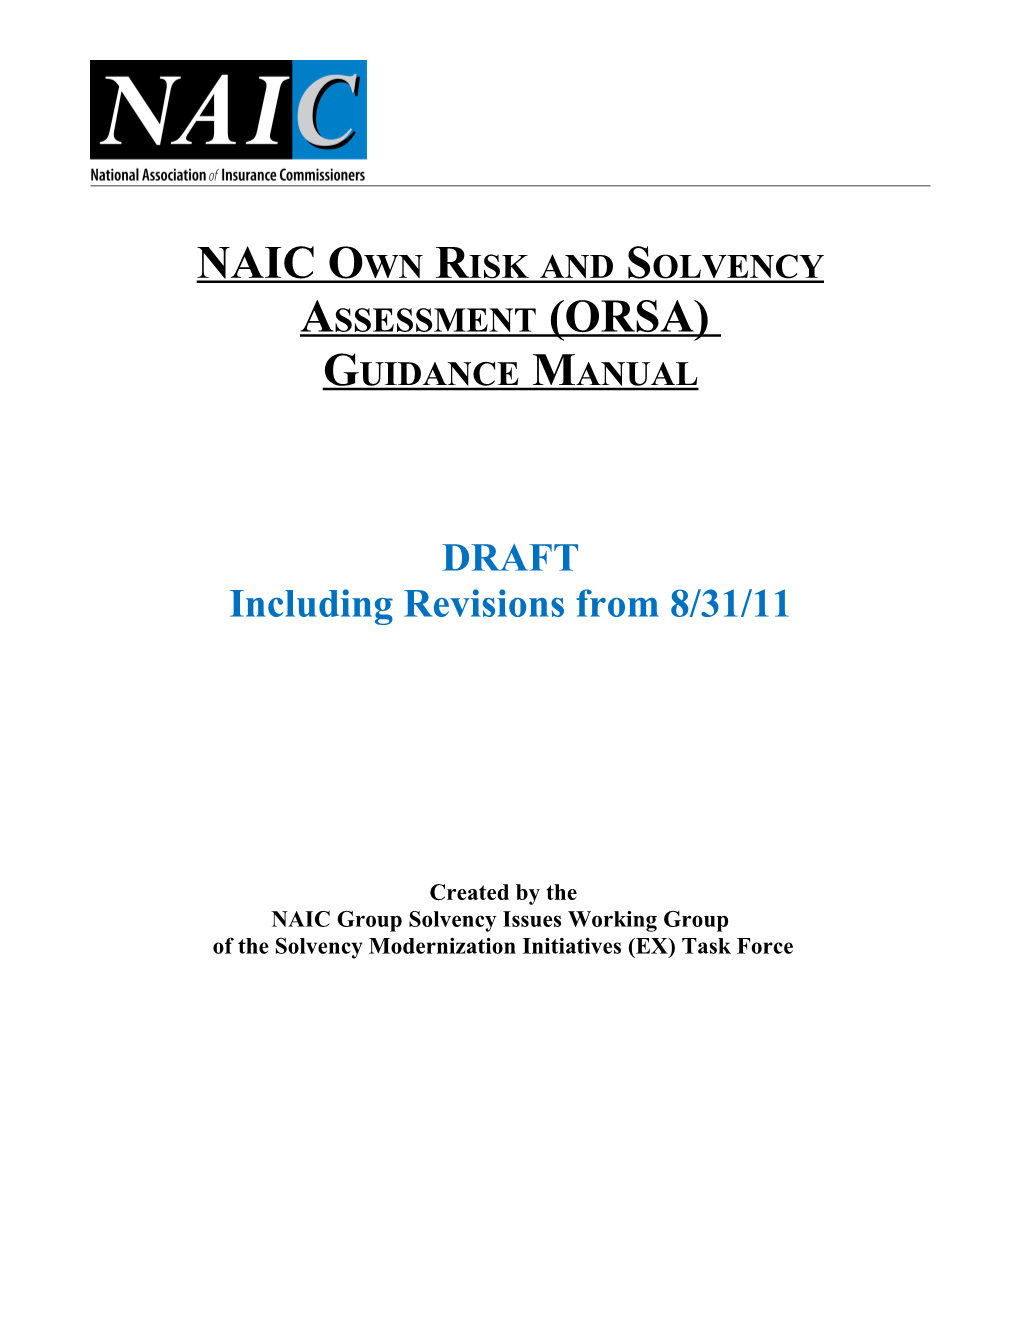 NAIC Own Risk and Solvency Assessment (ORSA)